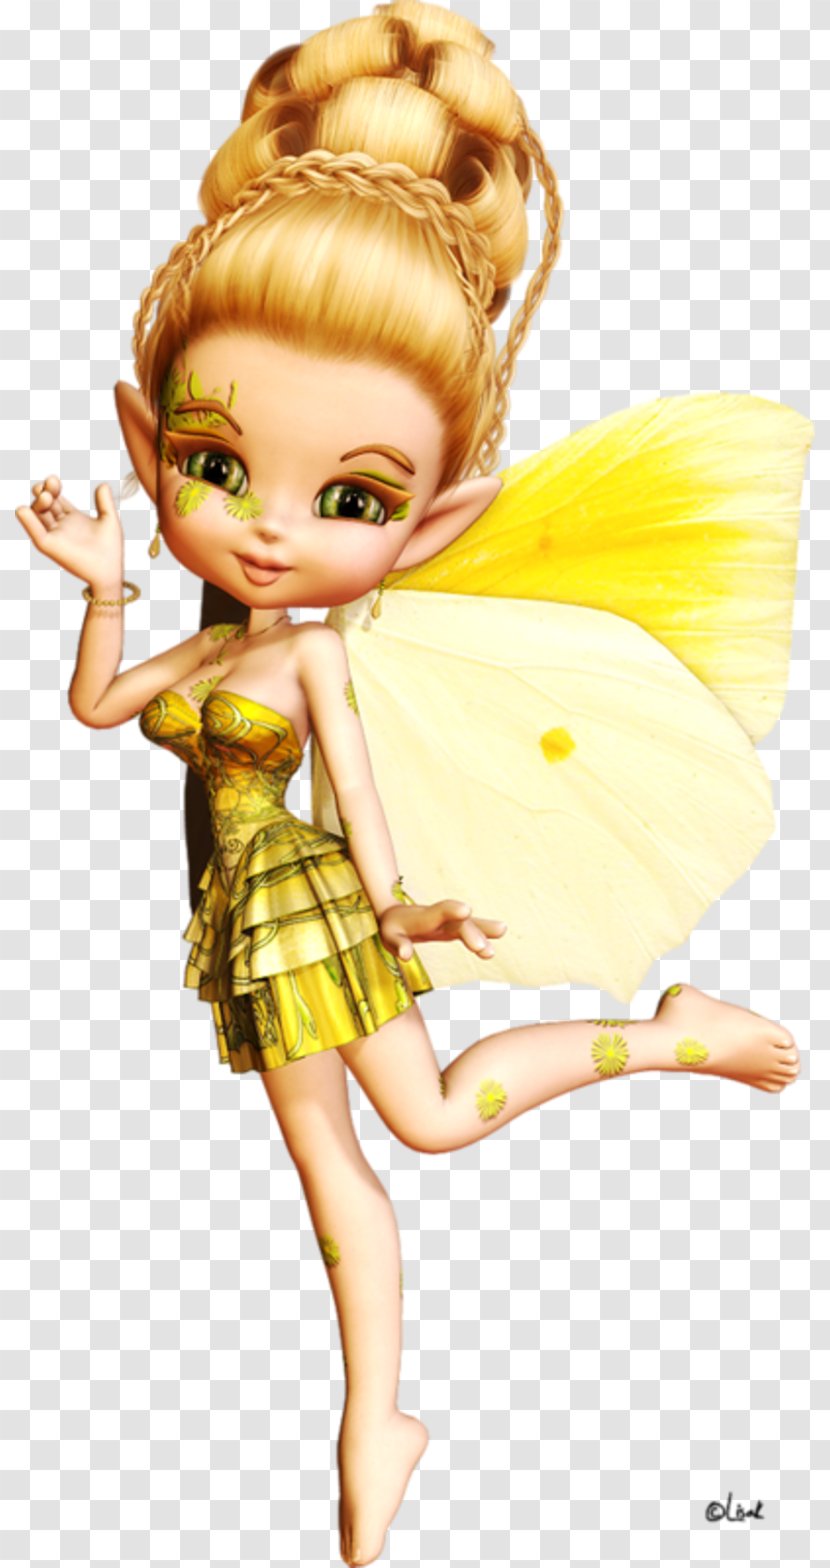 Fairy HTTP Cookie - Mythical Creature Transparent PNG